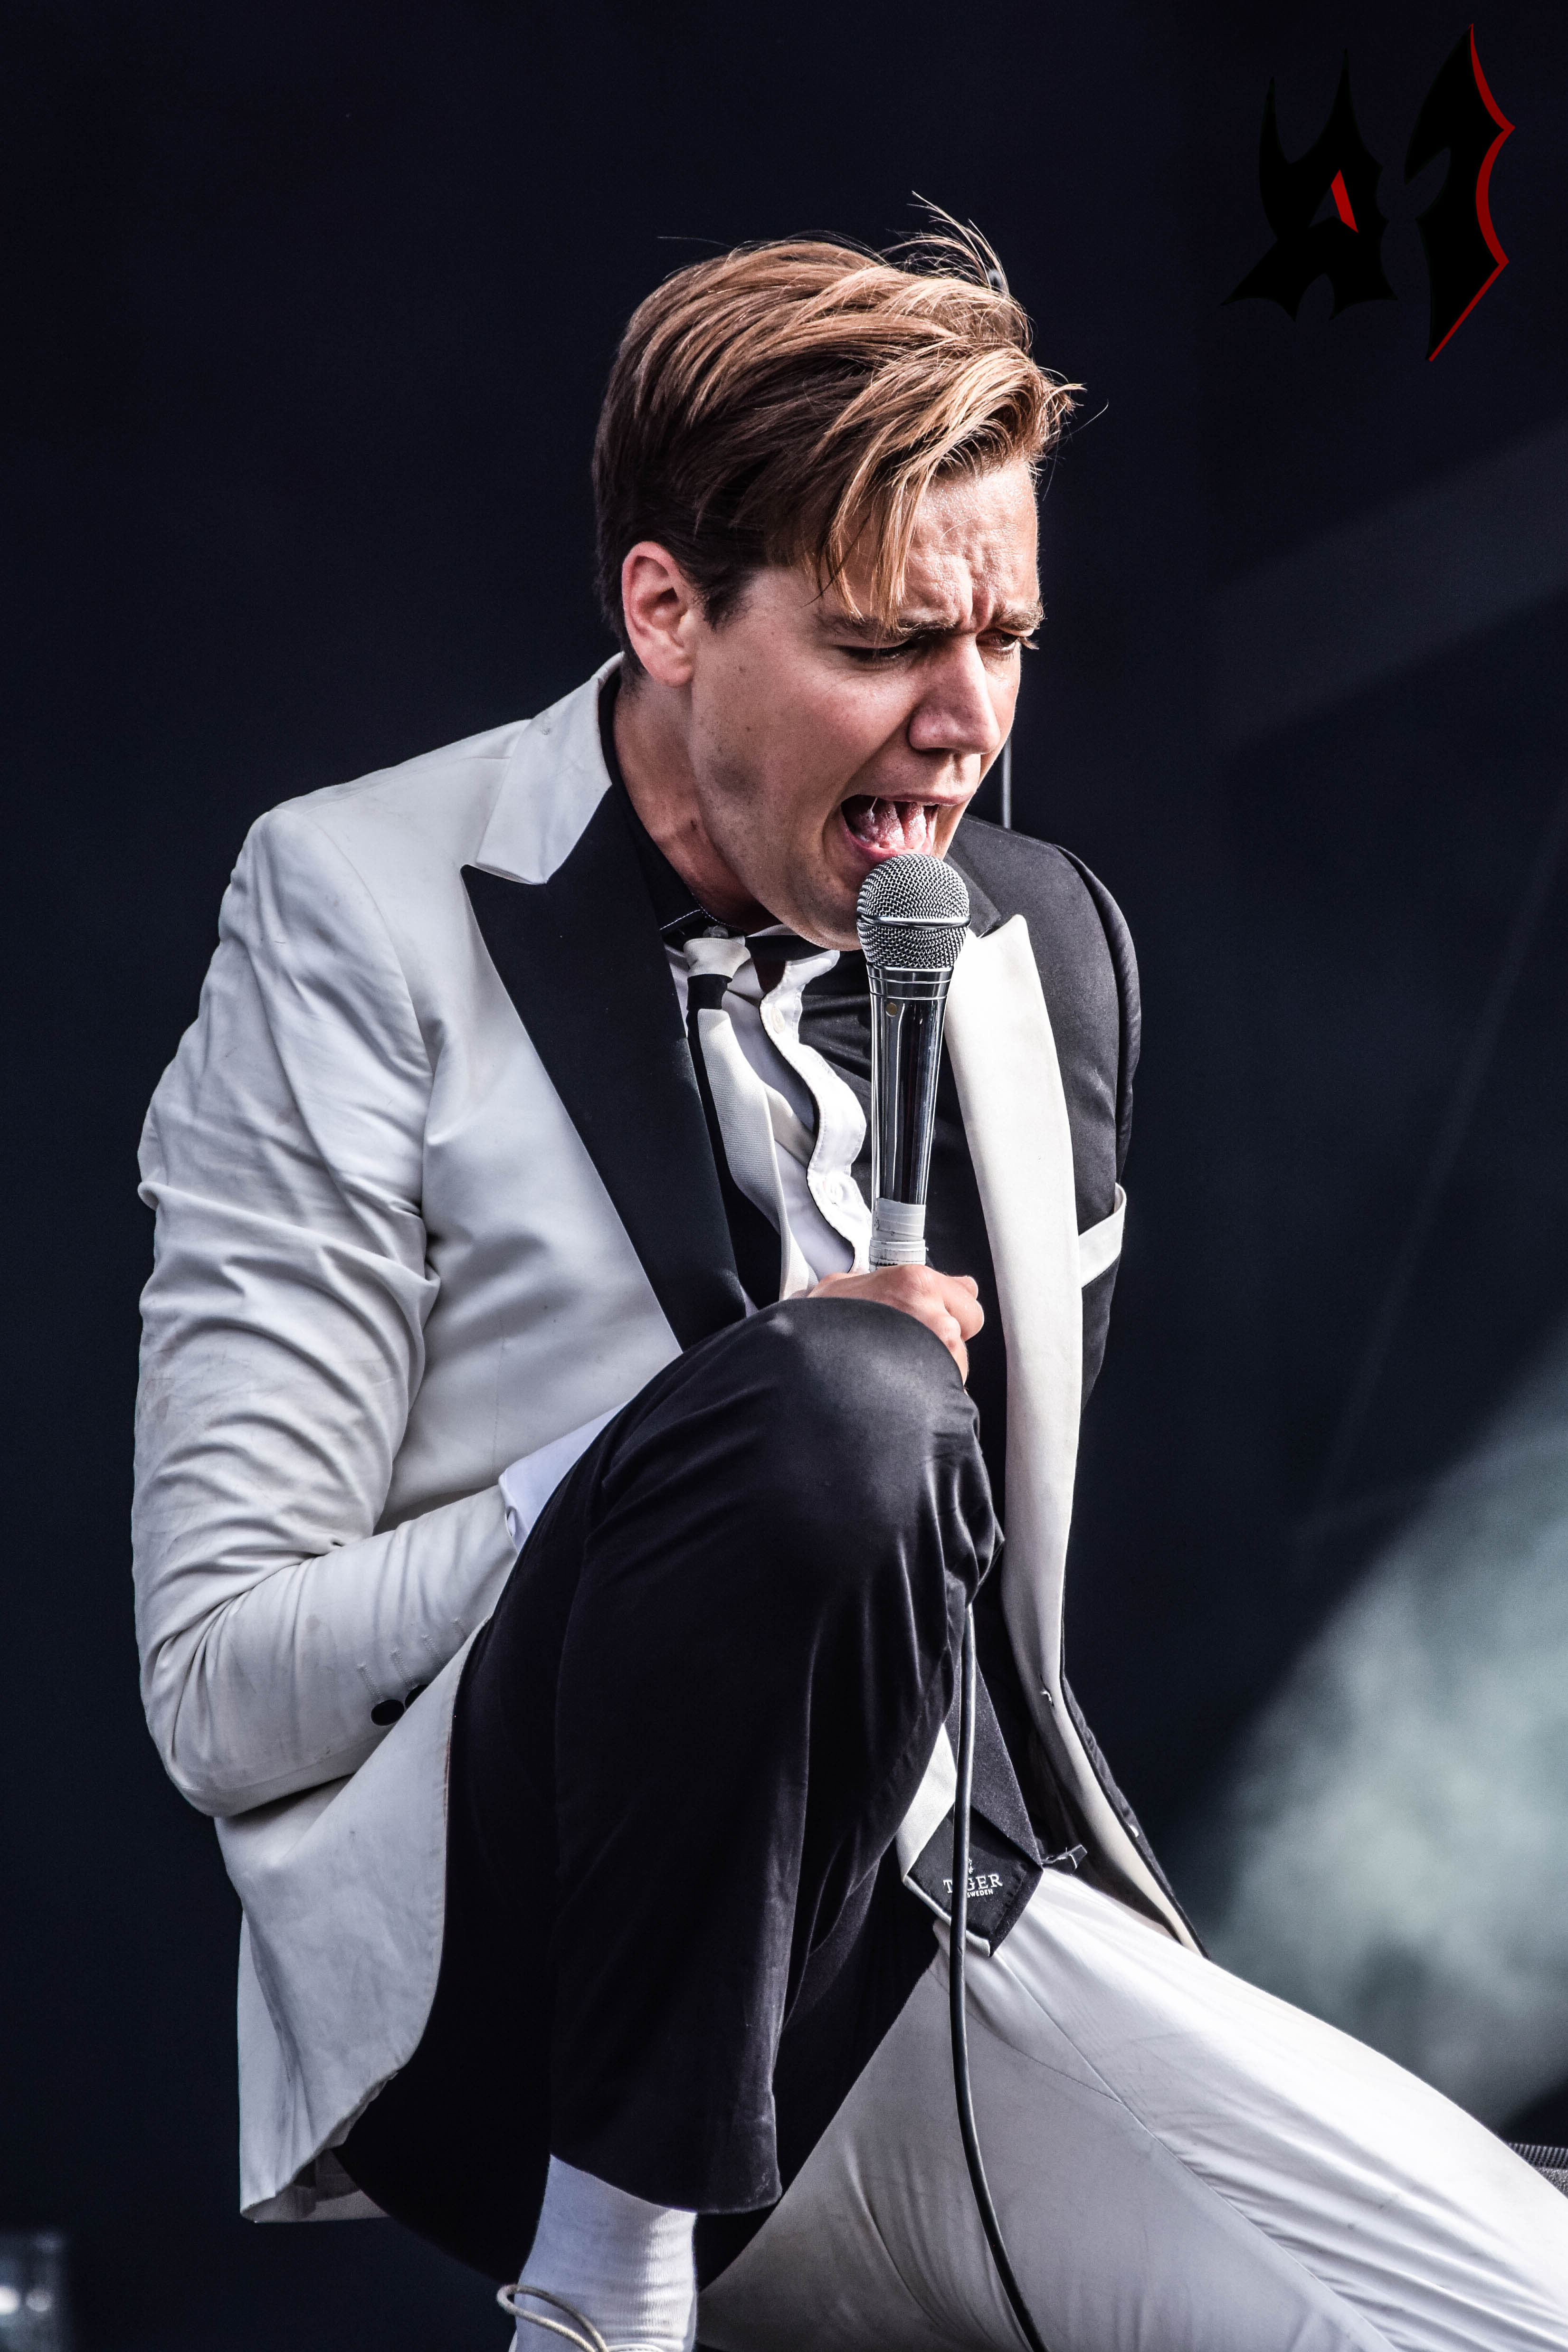 Donwload 2018 – Day 3 - The Hives 27